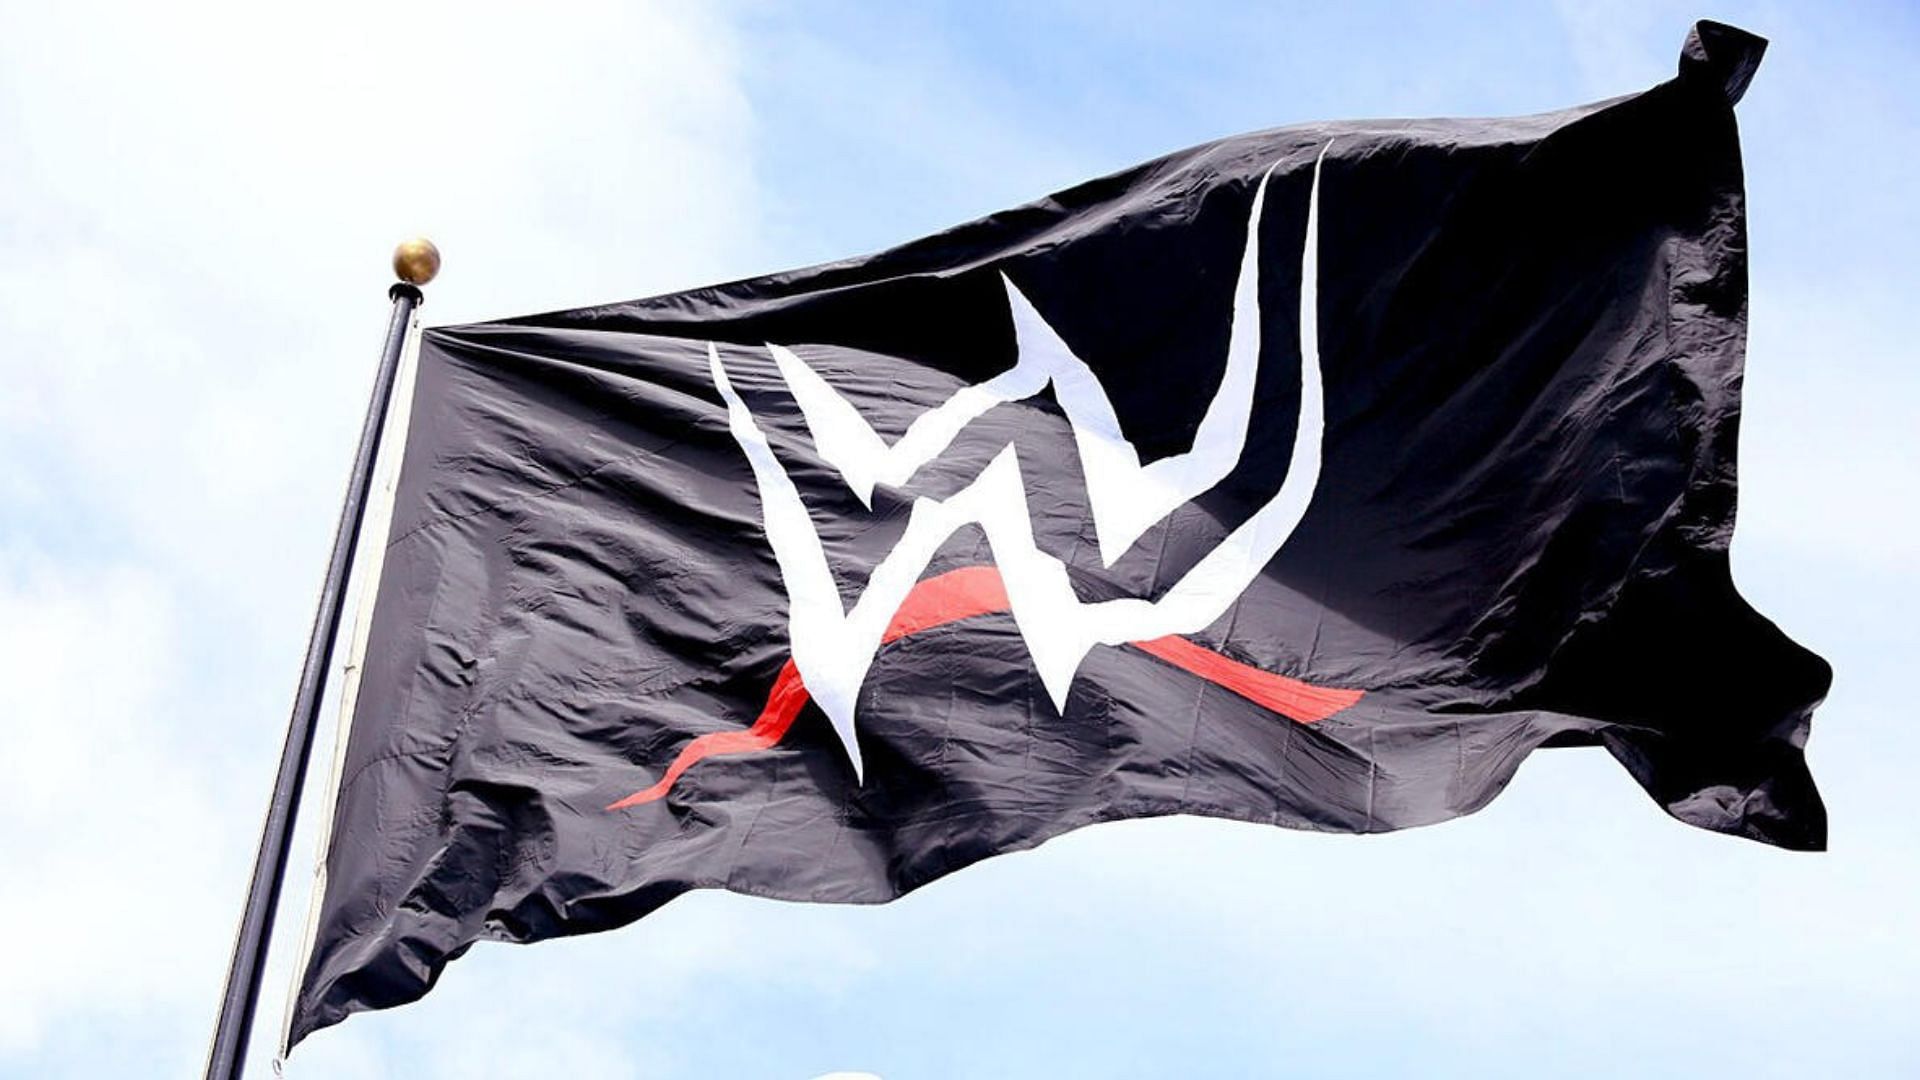 WWE was sold to Endeavor Group in 2023